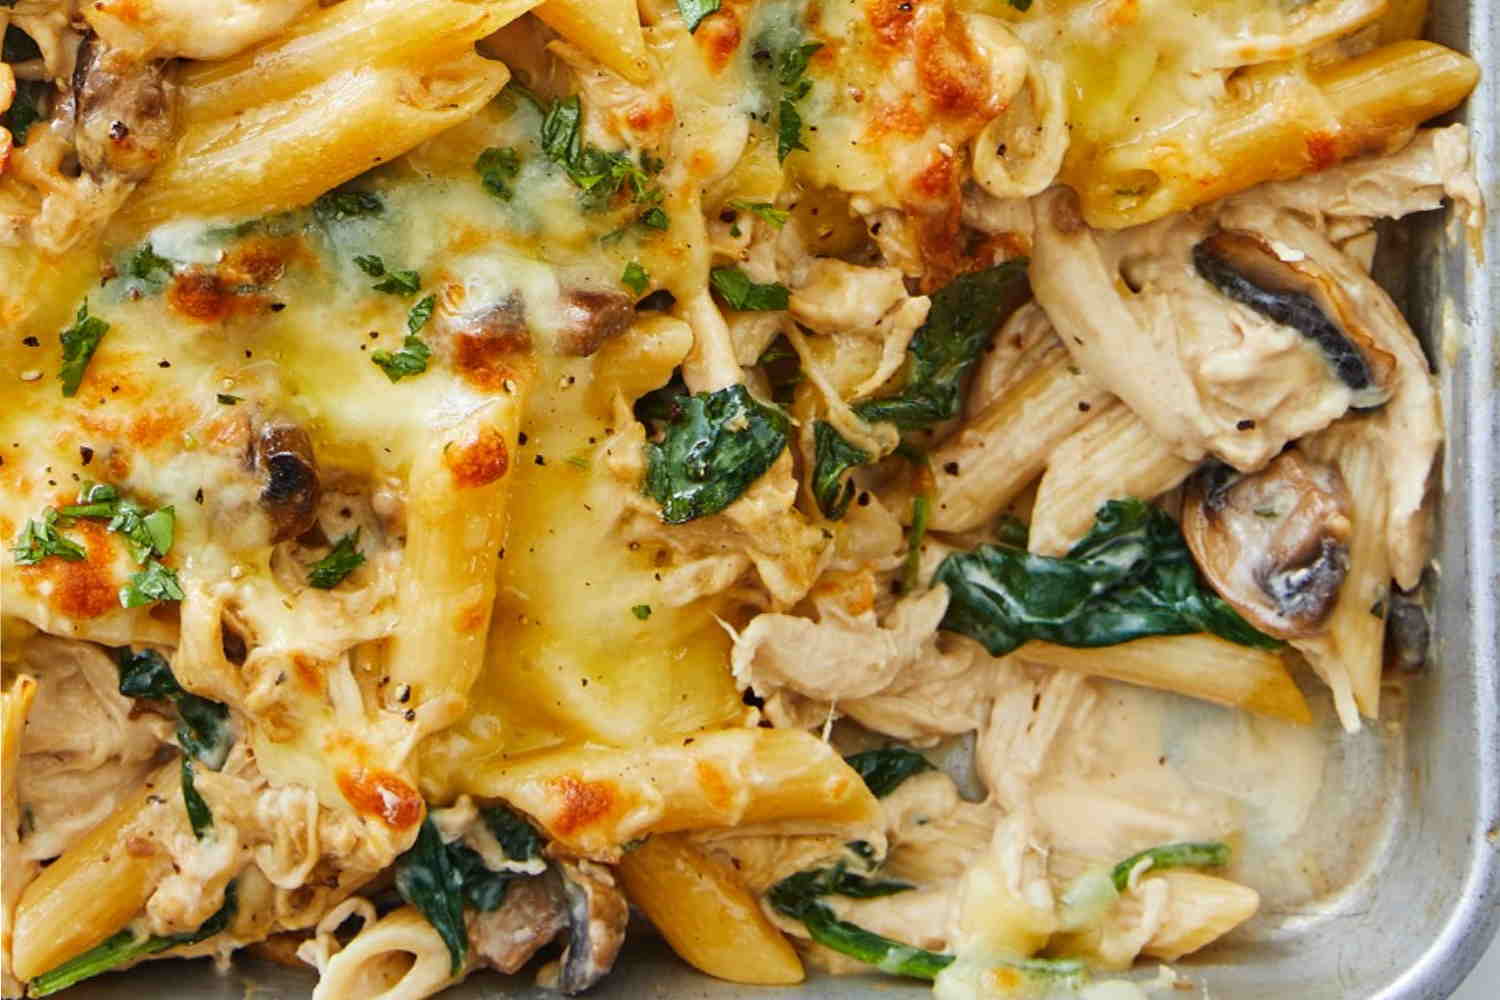 How to make baked pasta in the microwave